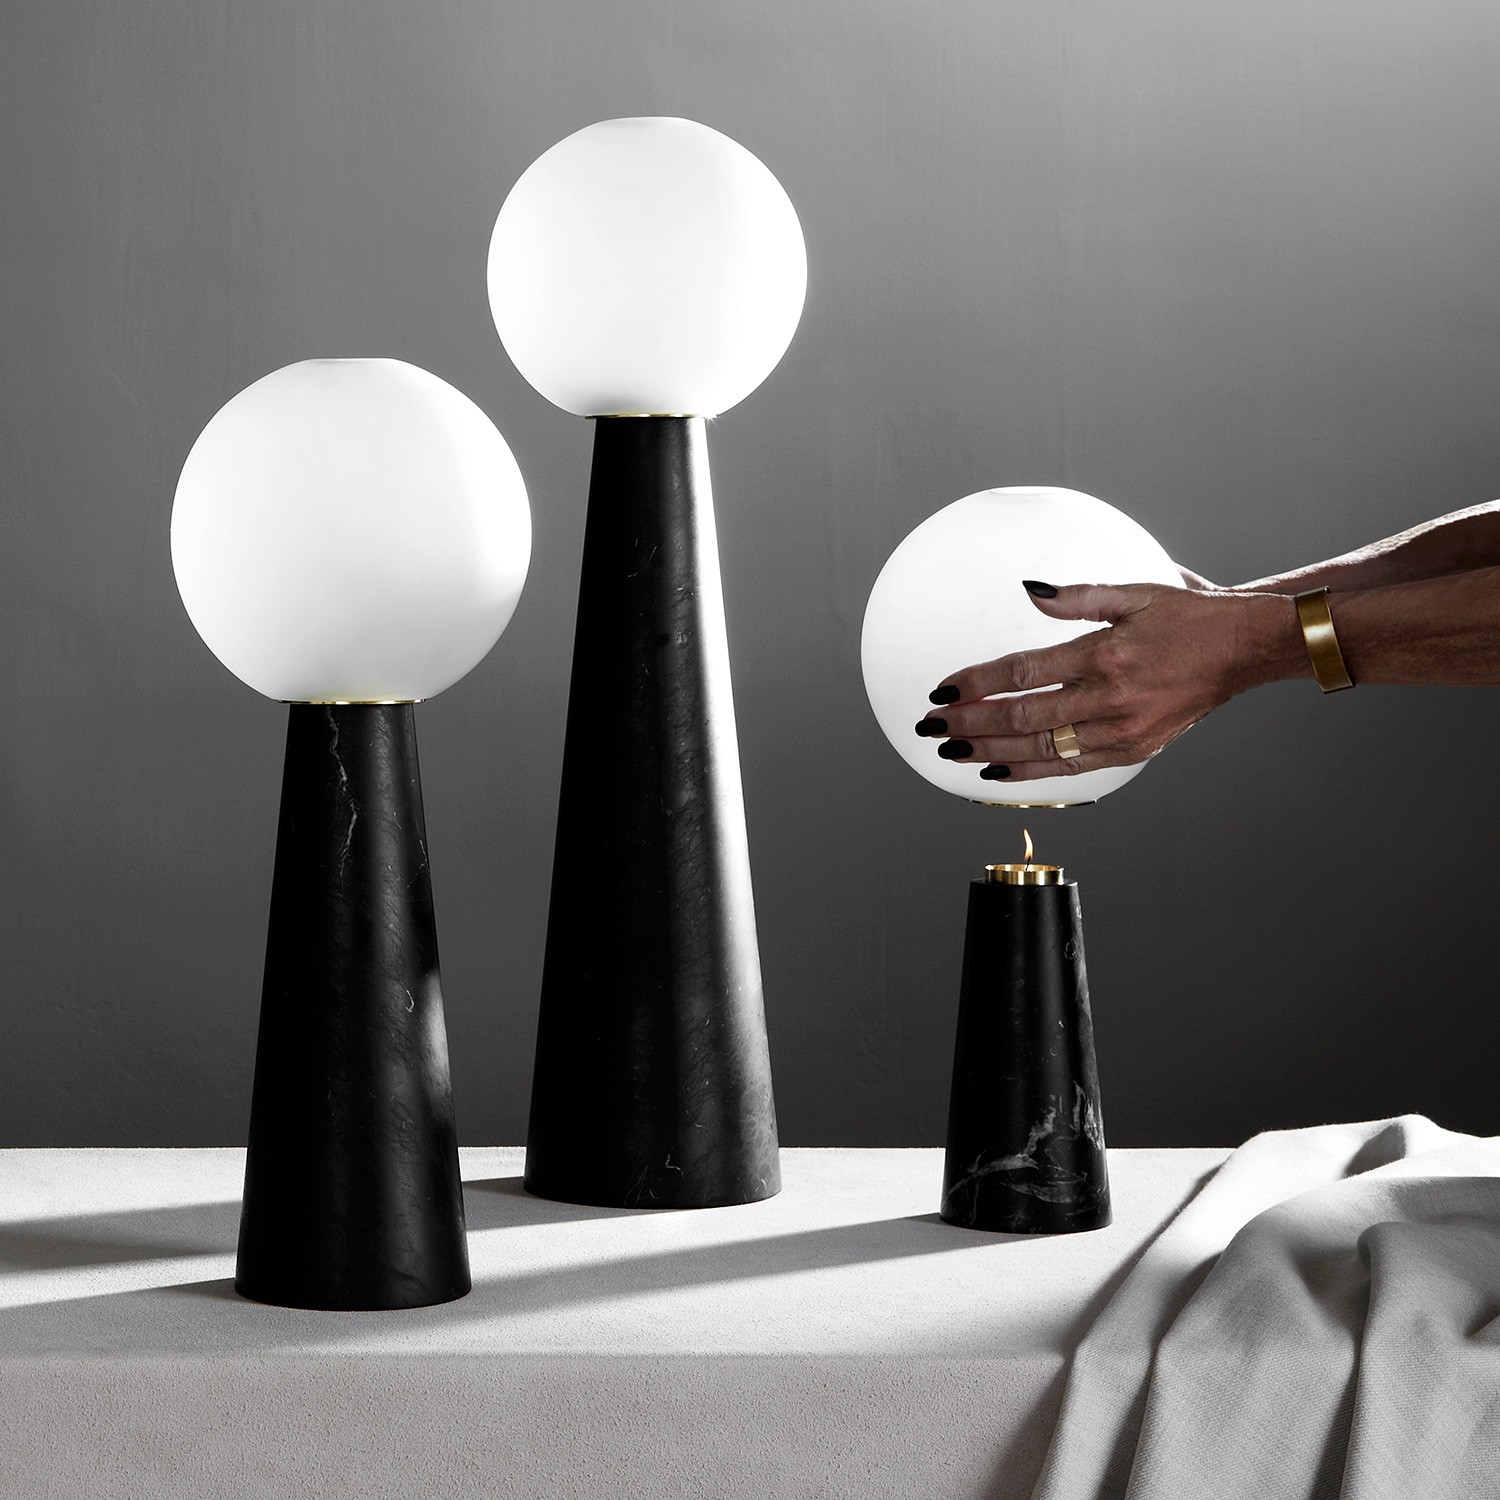 a hand reaching for a ball between two black and white lamps